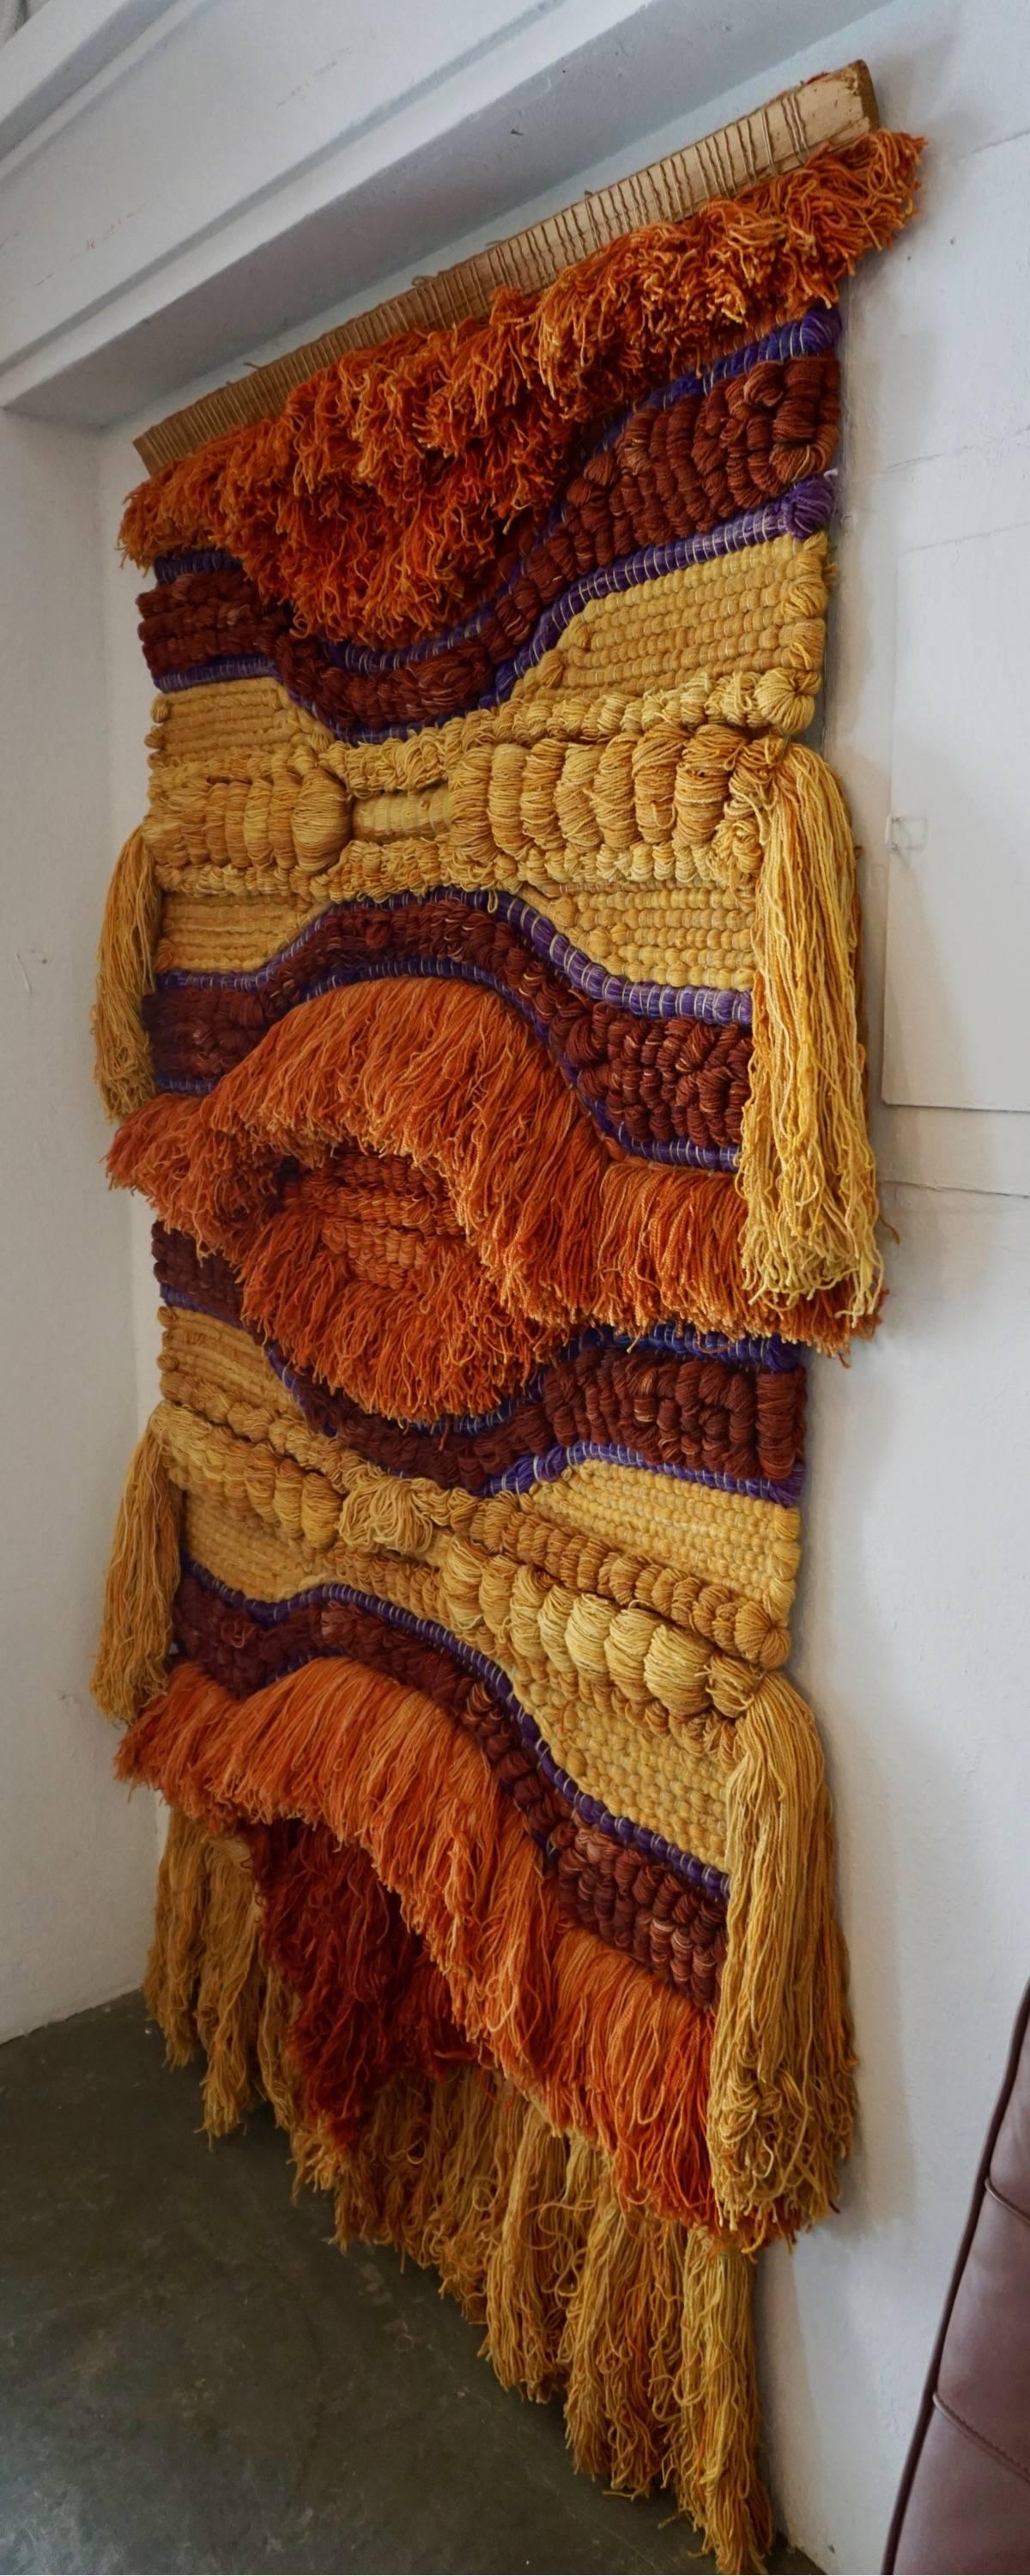 Woven, dyed and tufted yarns in bold colors of orange, burnt sienna and purple violet.
Excellent example of 1960s fiber art.